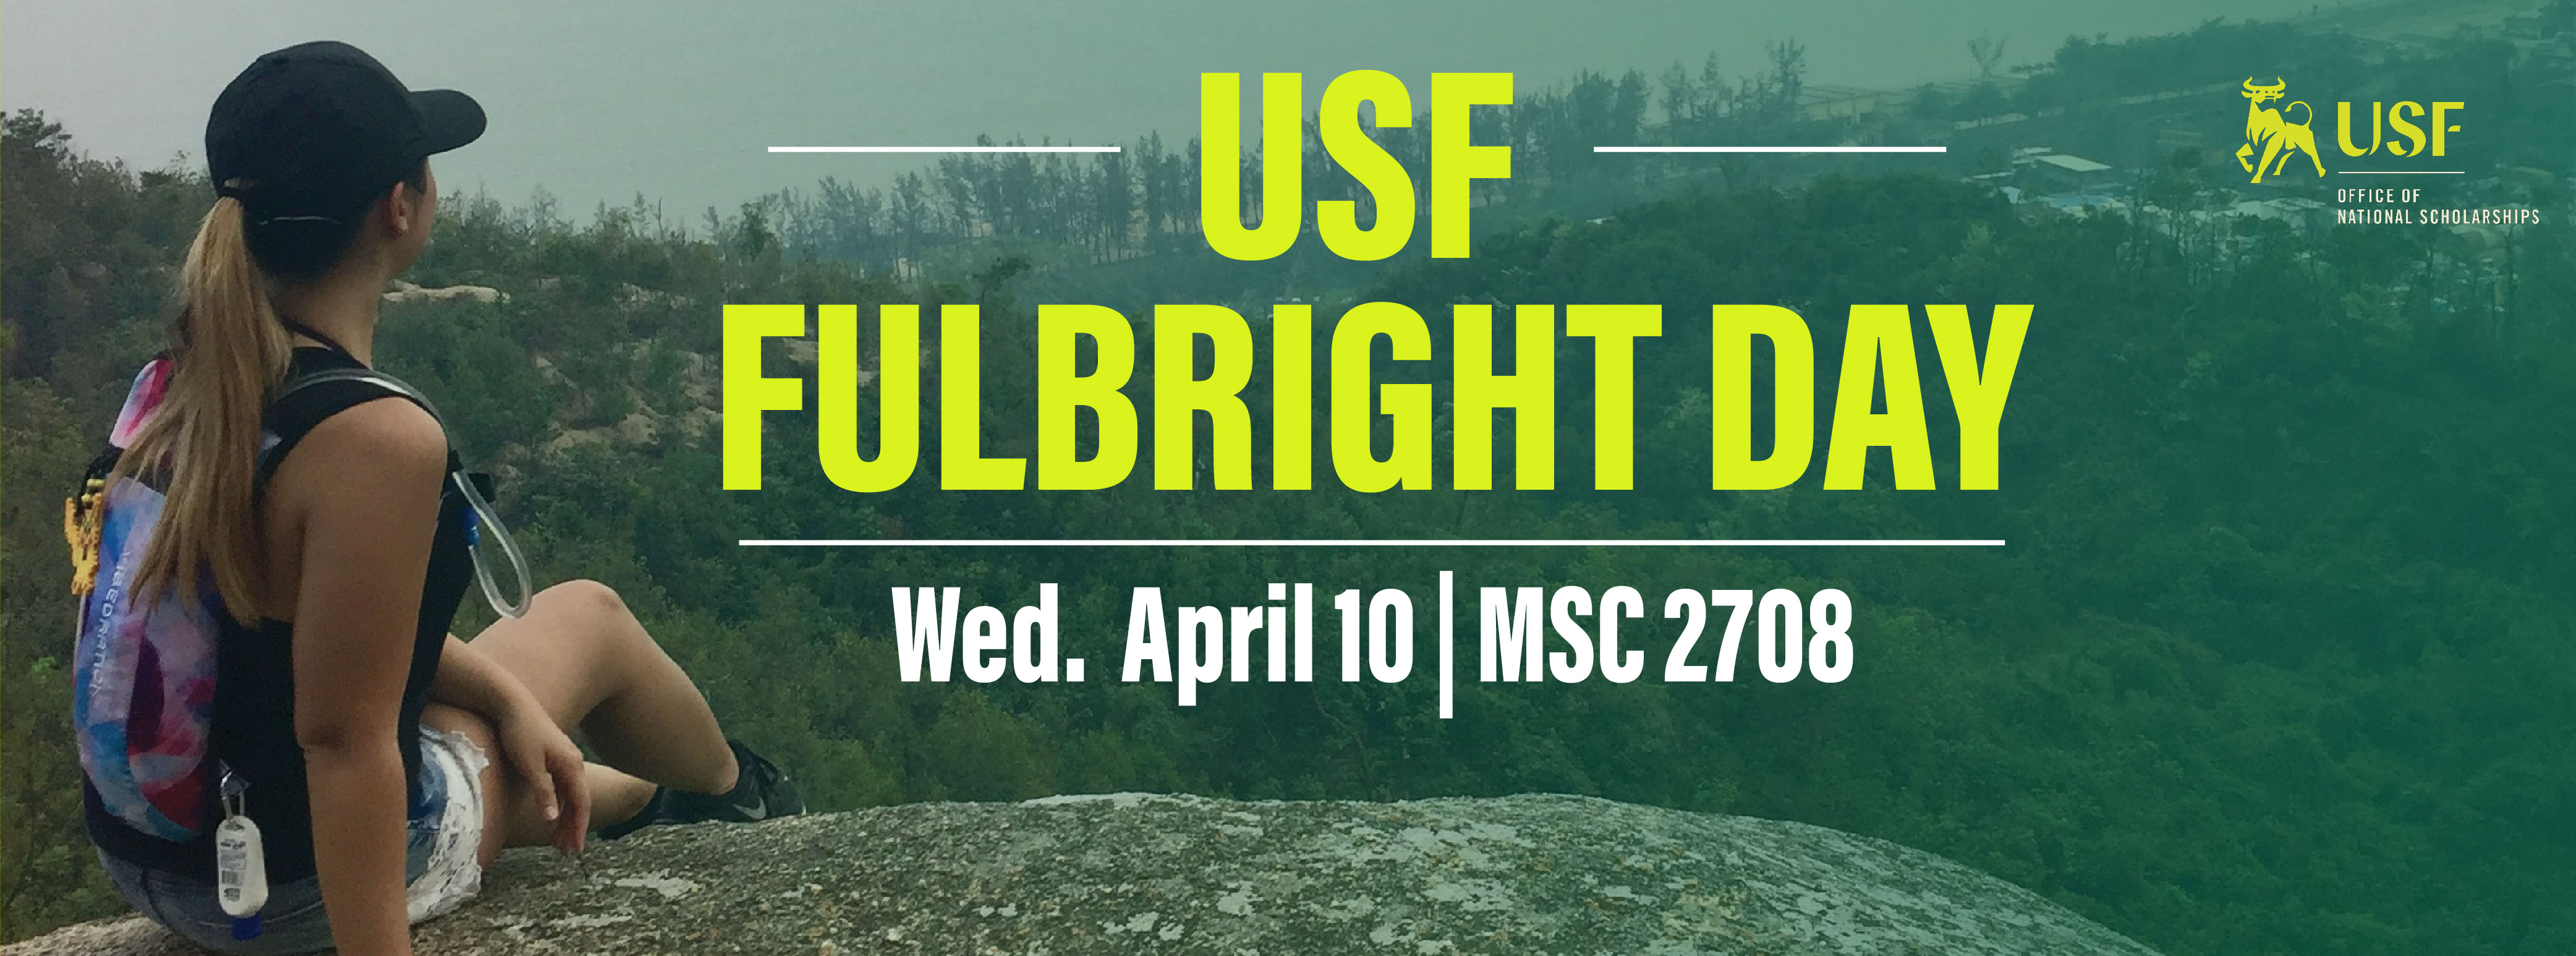 USF Fulbright Day